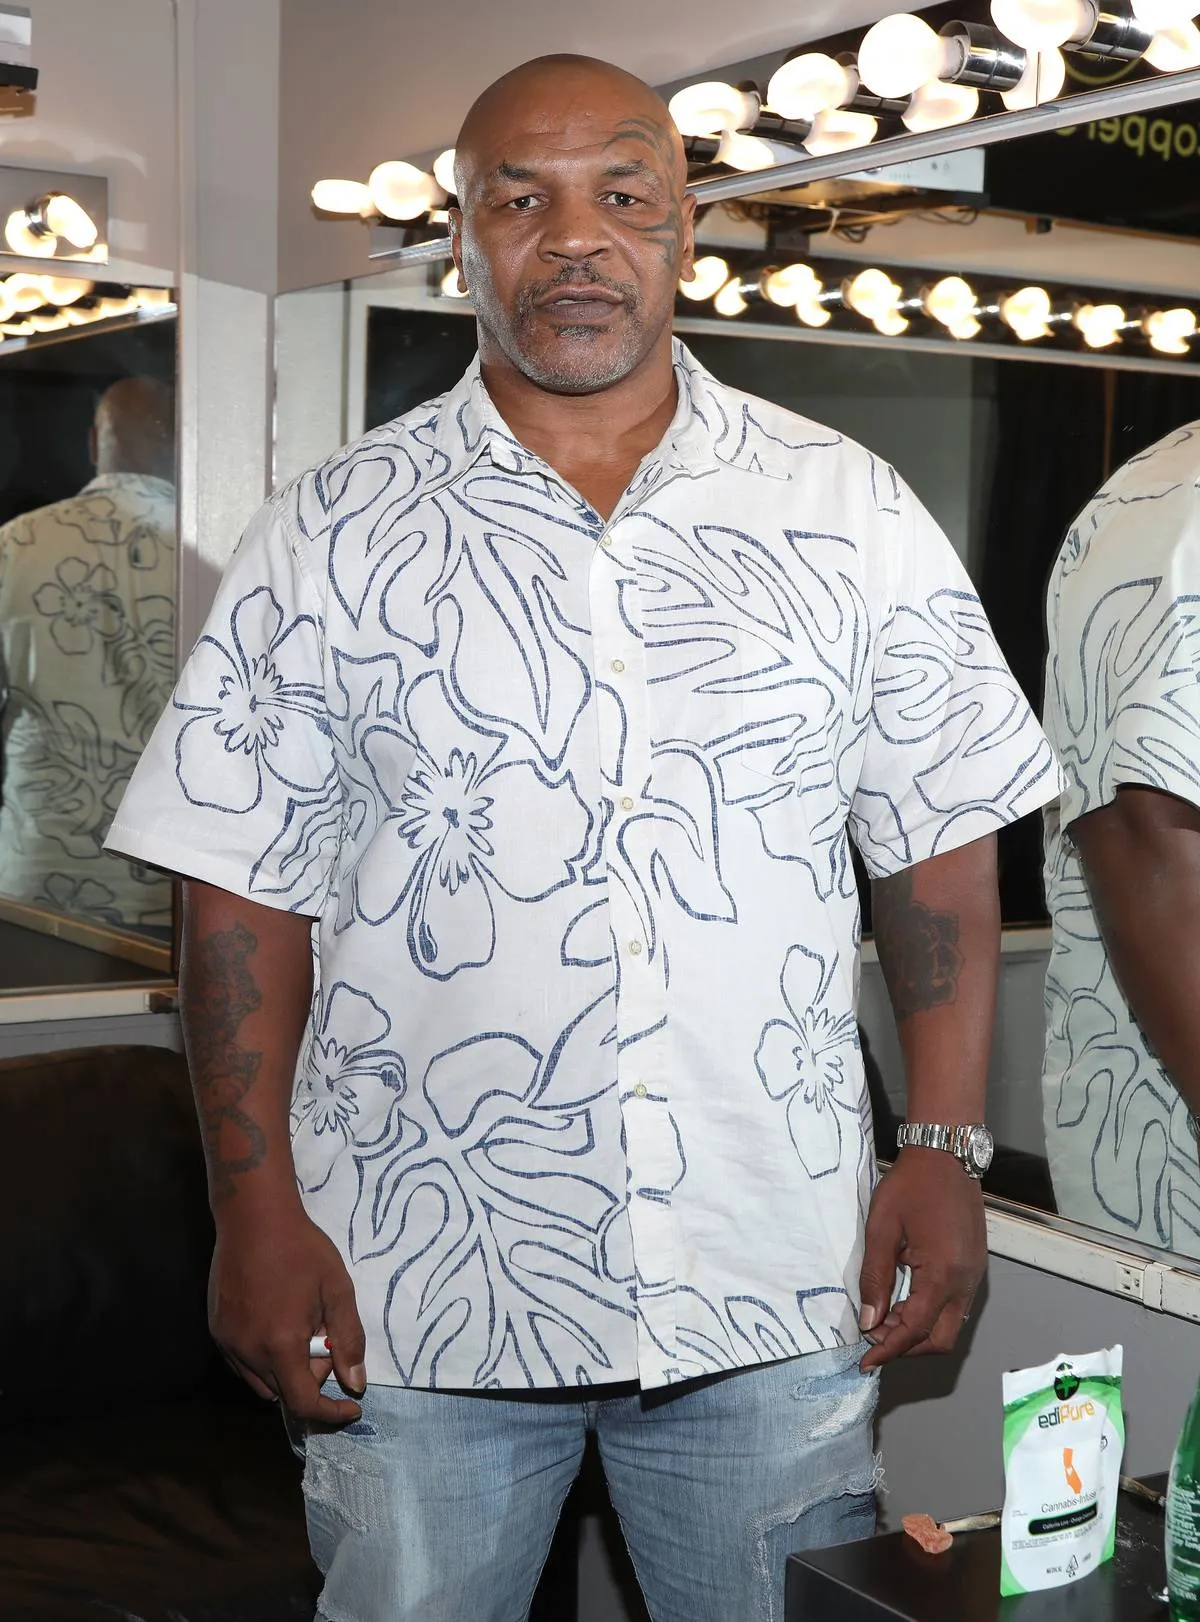 Mike Tyson Lost A Bit Of His Muscle Definition